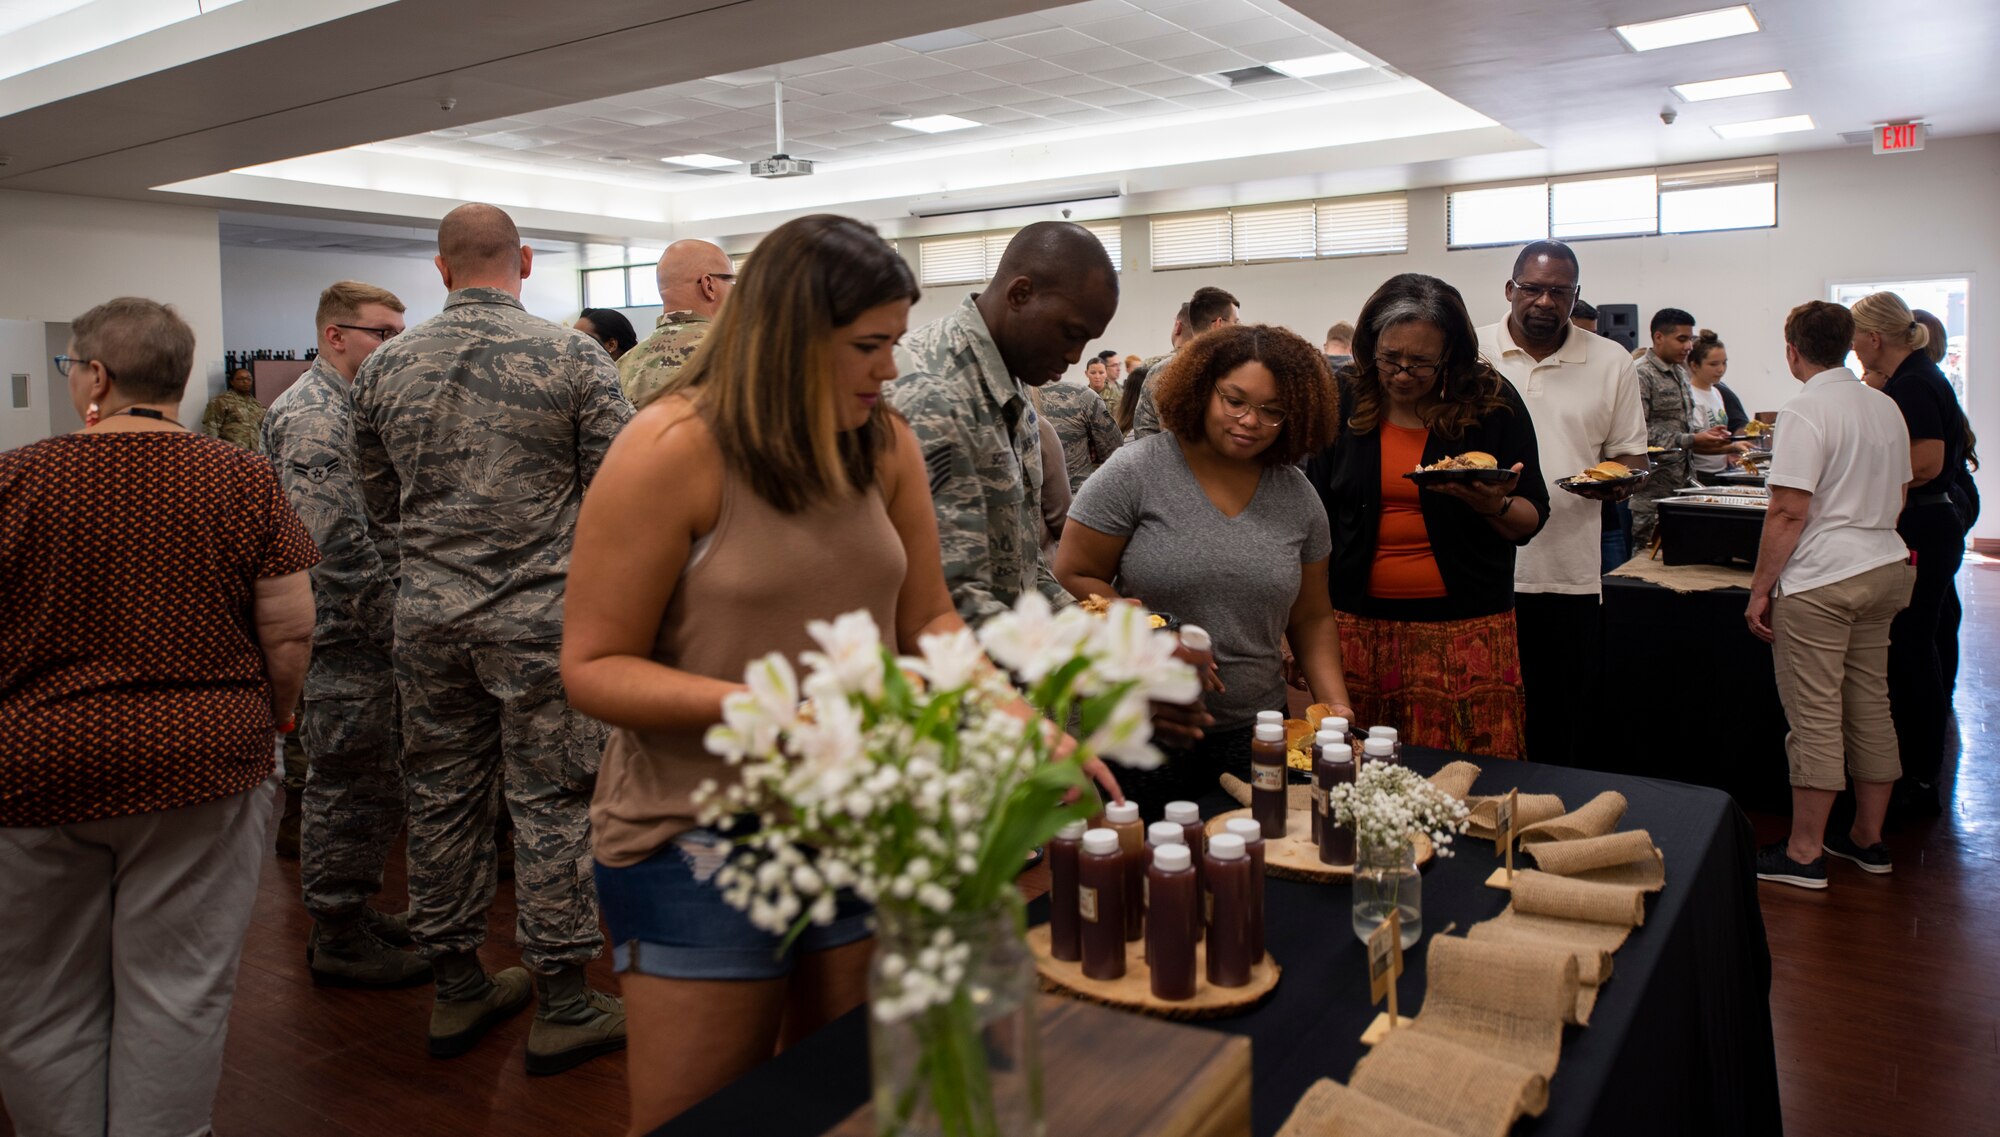 Airmen assigned to the 6th Communications Squadron and their family member’s line up to eat at the Chapel following an open house at MacDill Air Force Base, Fla., August 9, 2019.